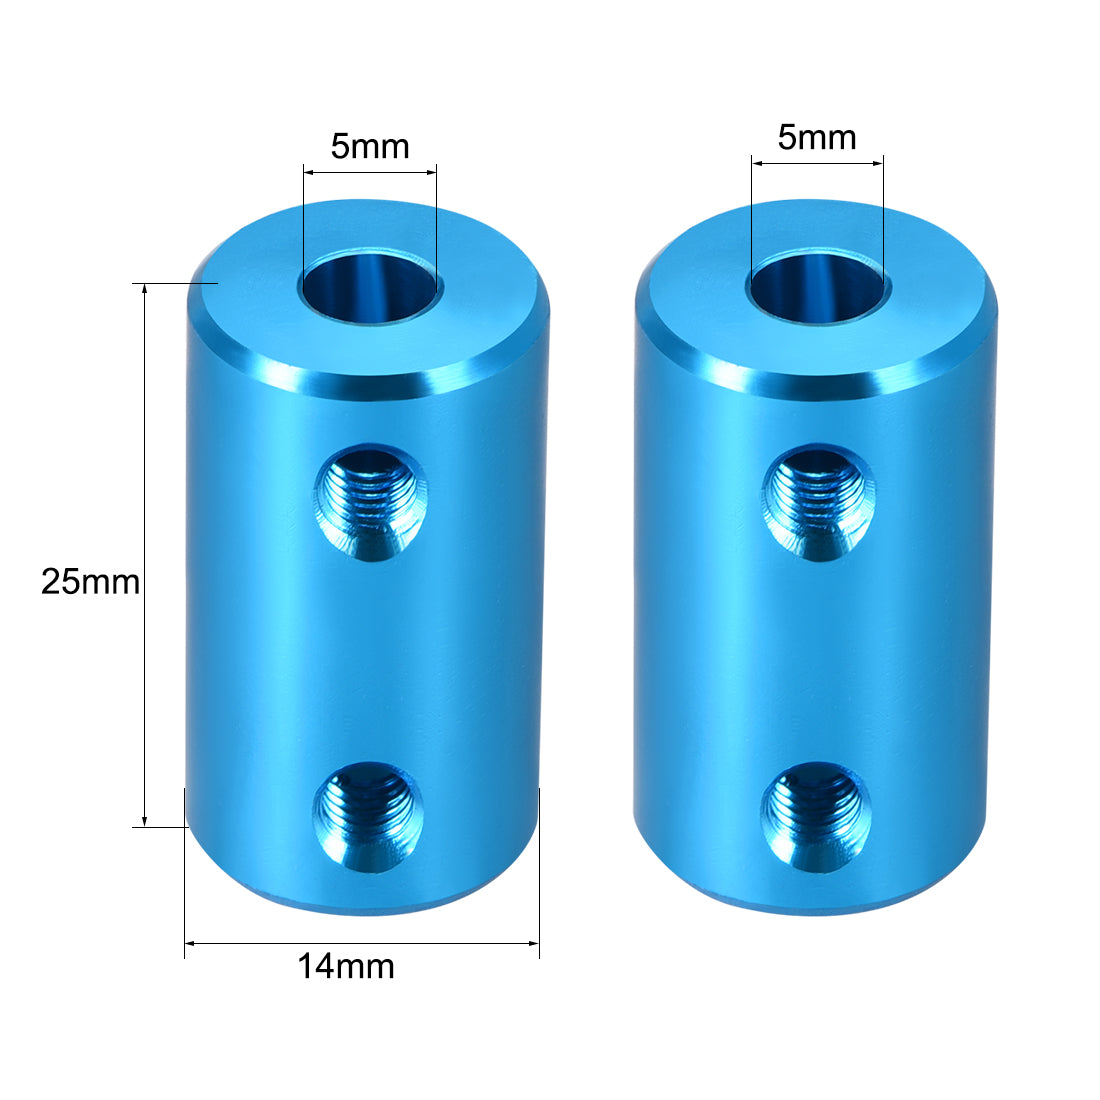 uxcell Uxcell Shaft Coupling 5mm to 5mm Bore L25xD14 Robot Motor Wheel Rigid Coupler Connector Blue 2 PCS